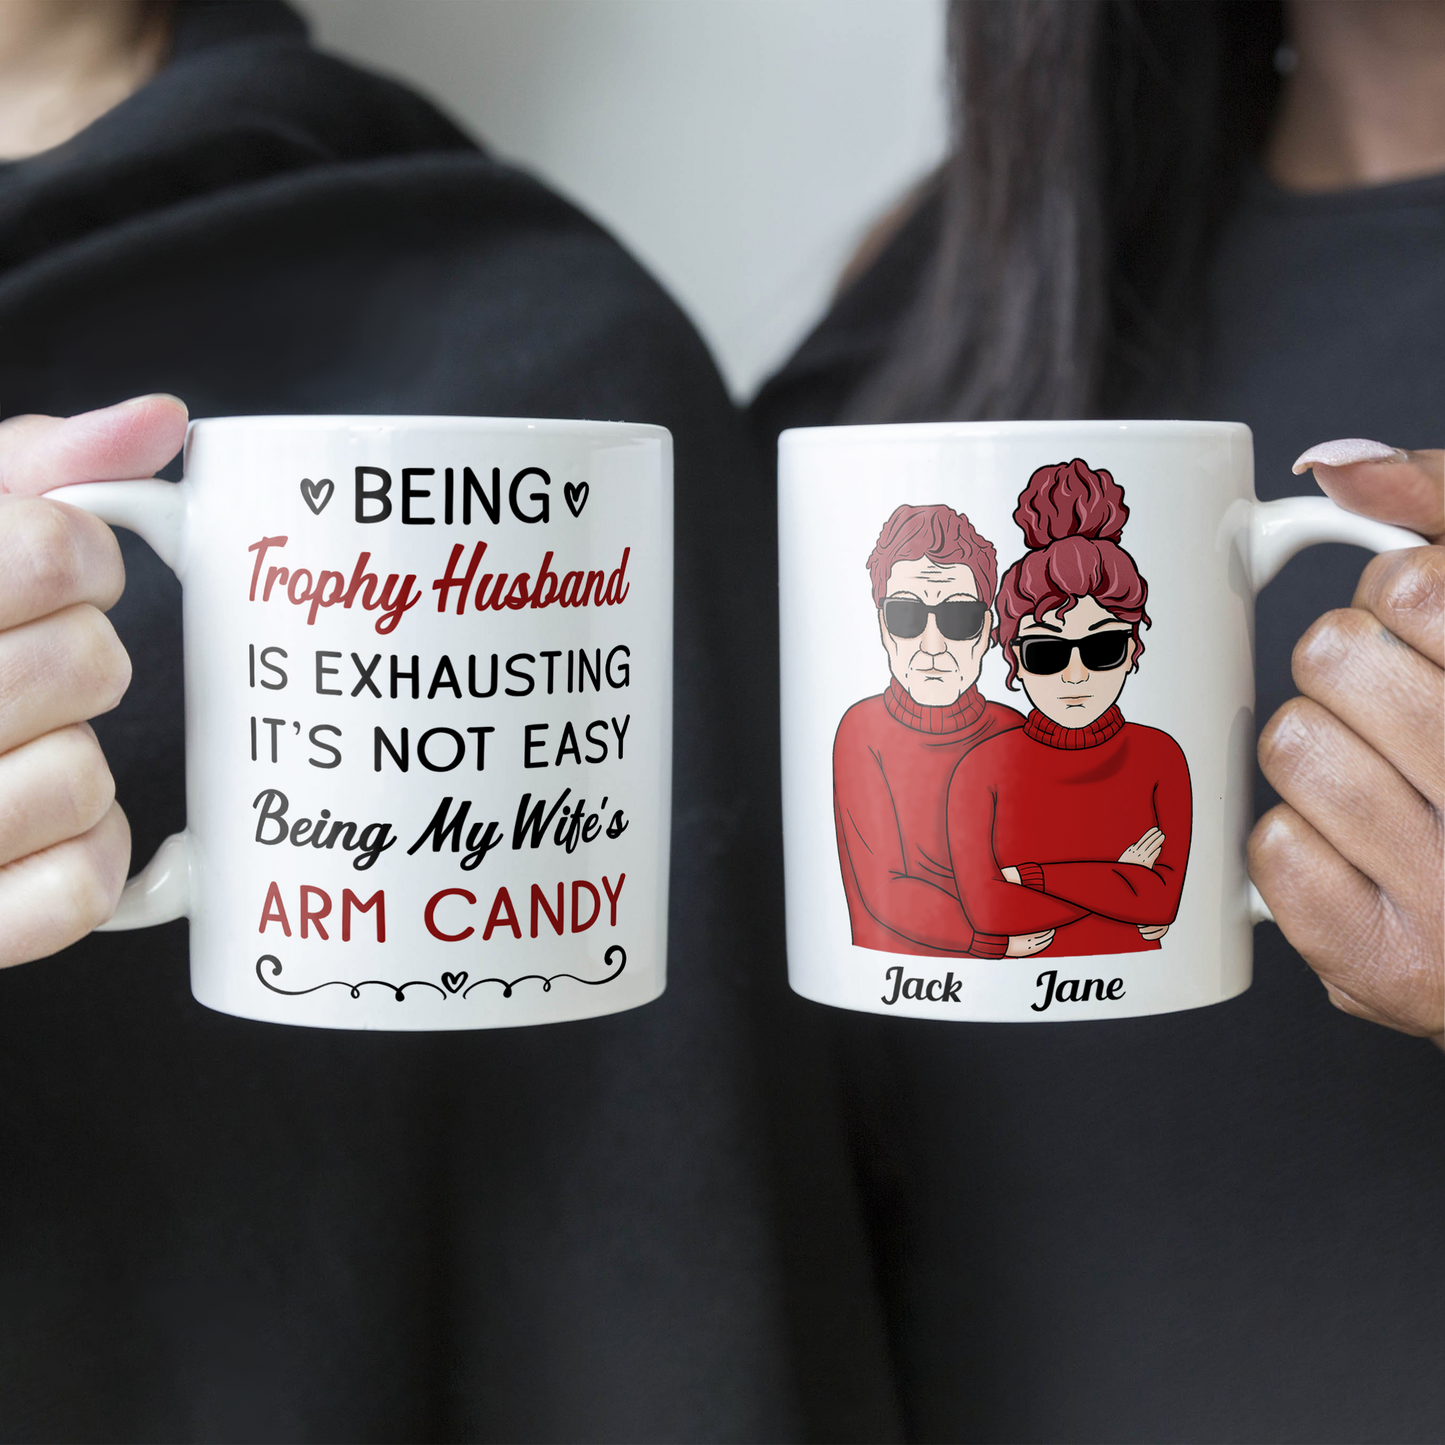 Being Trophy Husband Is Exhausting - Personalized Mug - Anniversary Gift For Husband And Wife